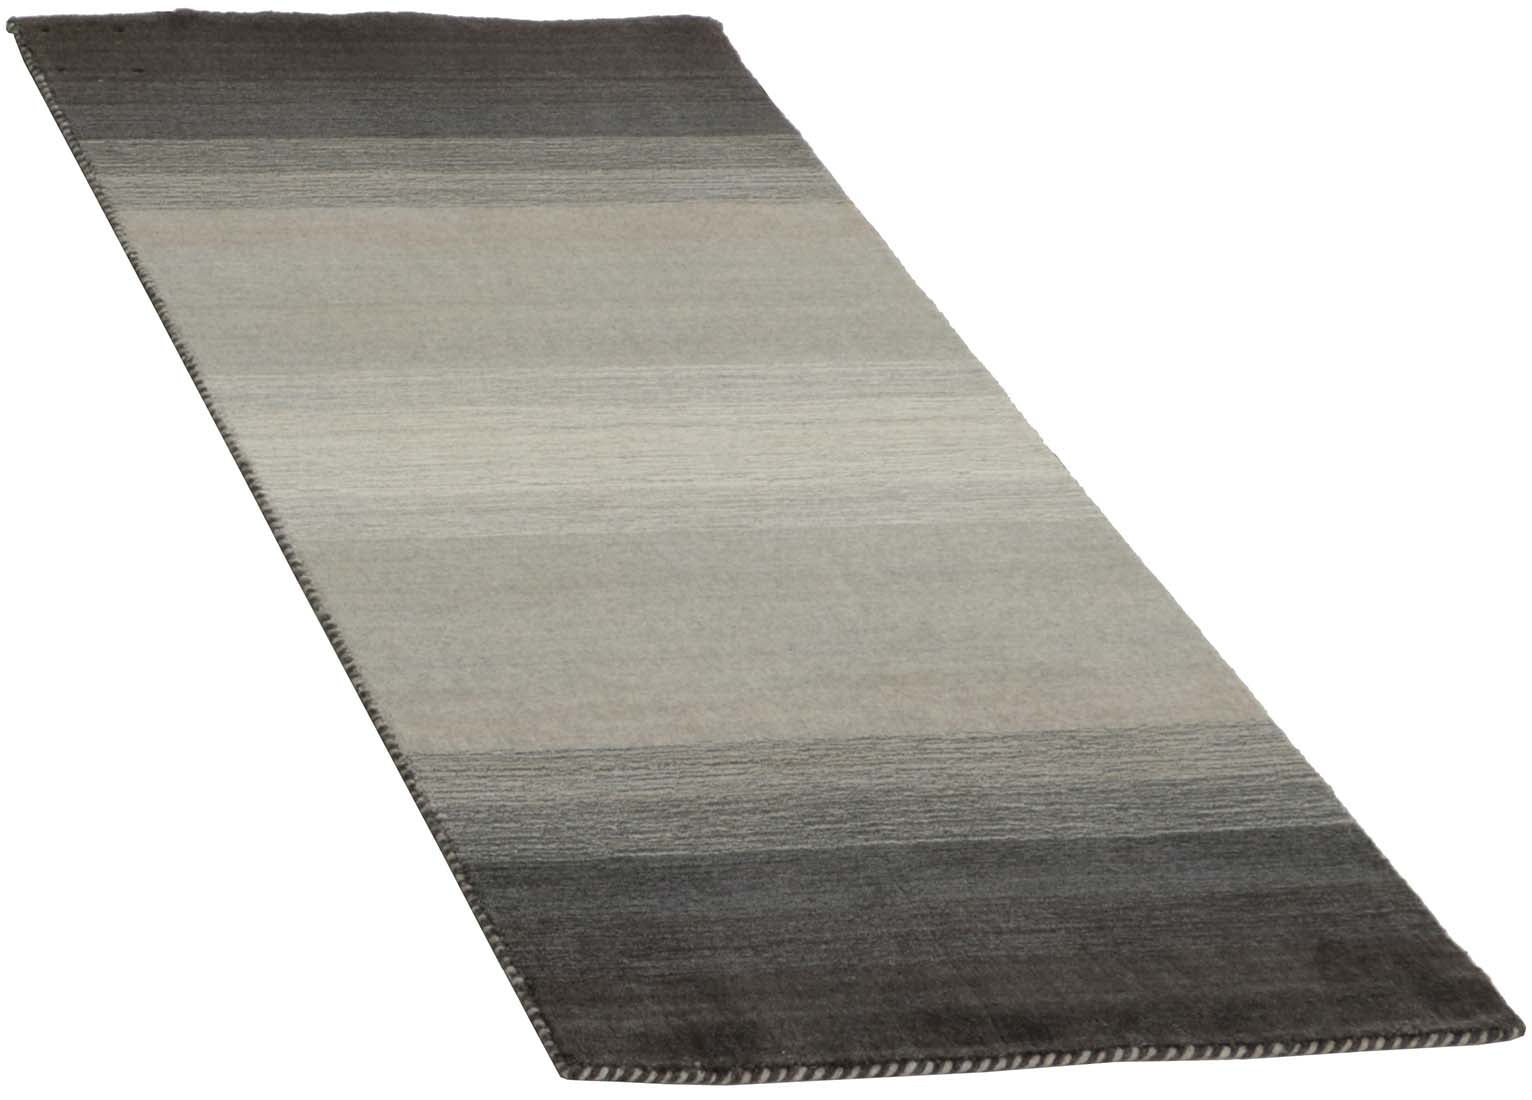  grey and cream ombre runner
